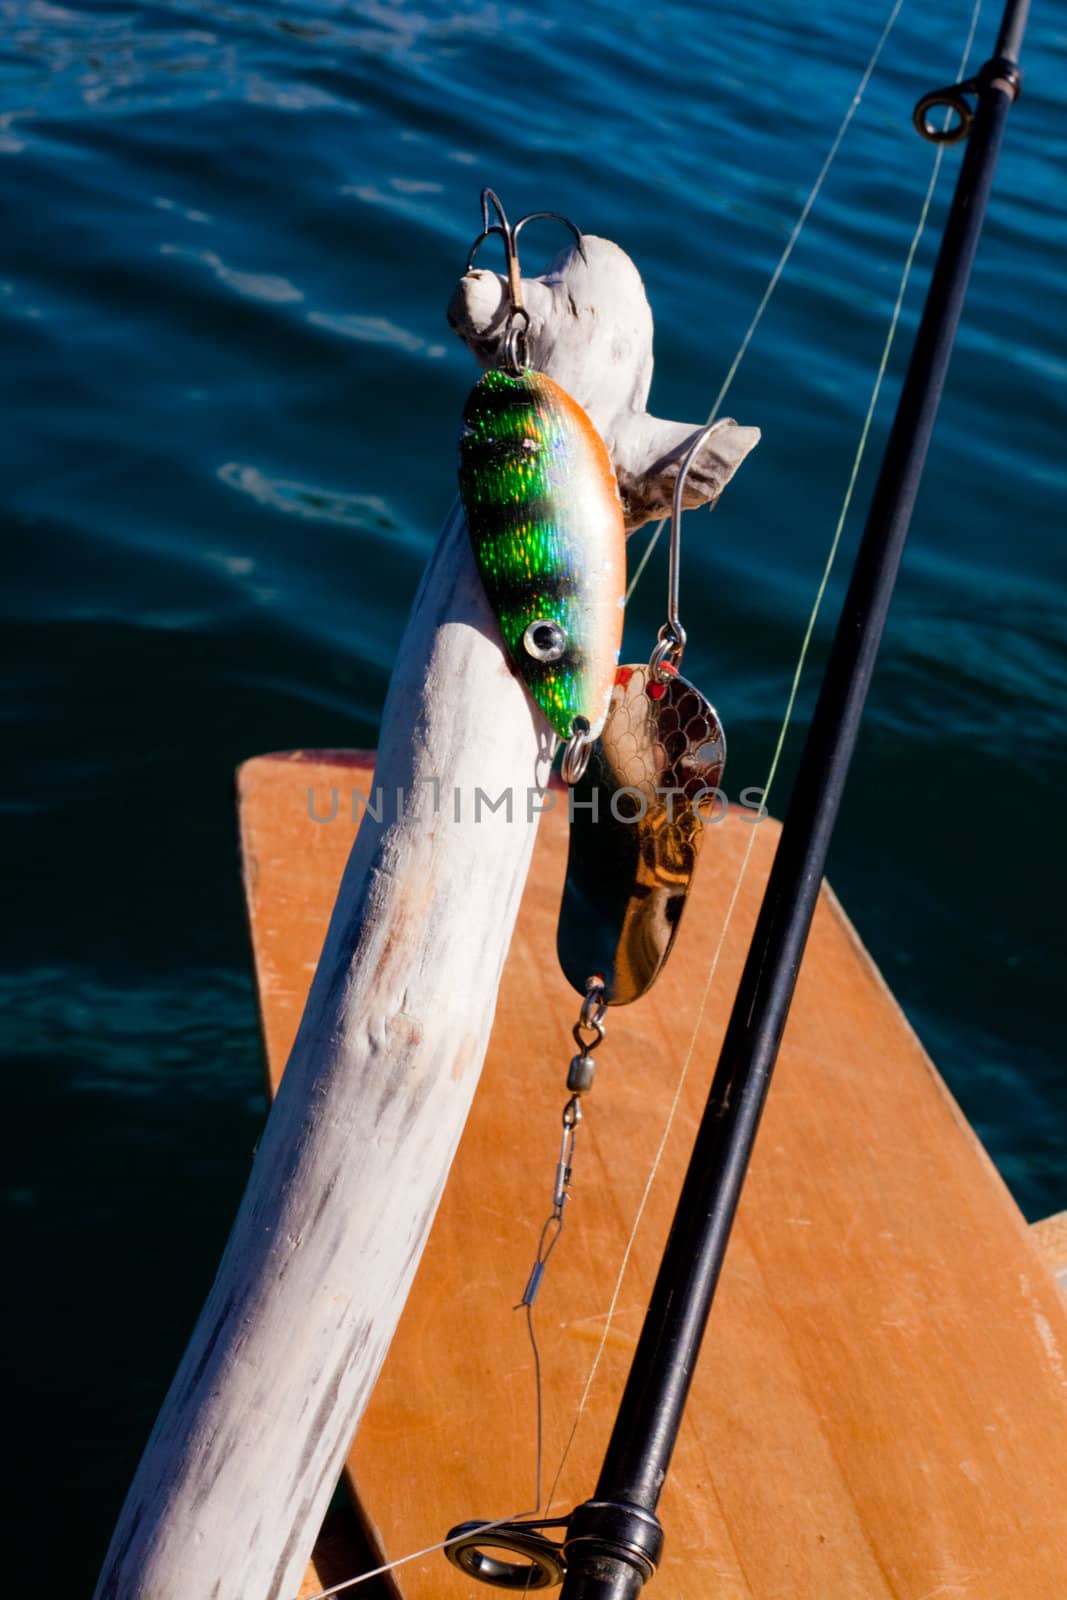 Fishing lure ready to be used in promising fish waters.